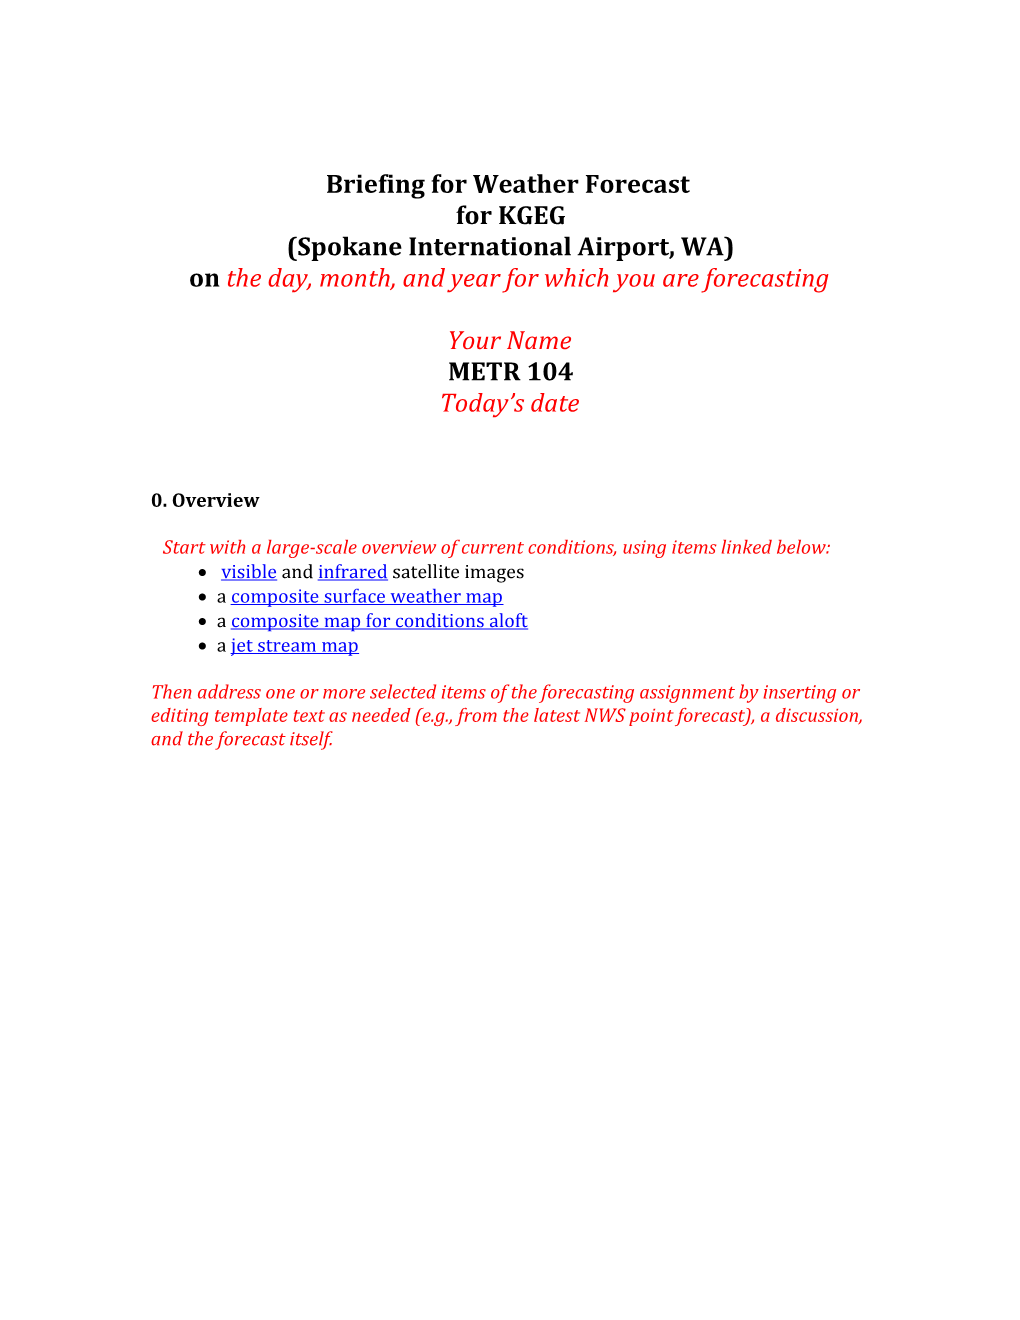 Briefing for Weather Forecast